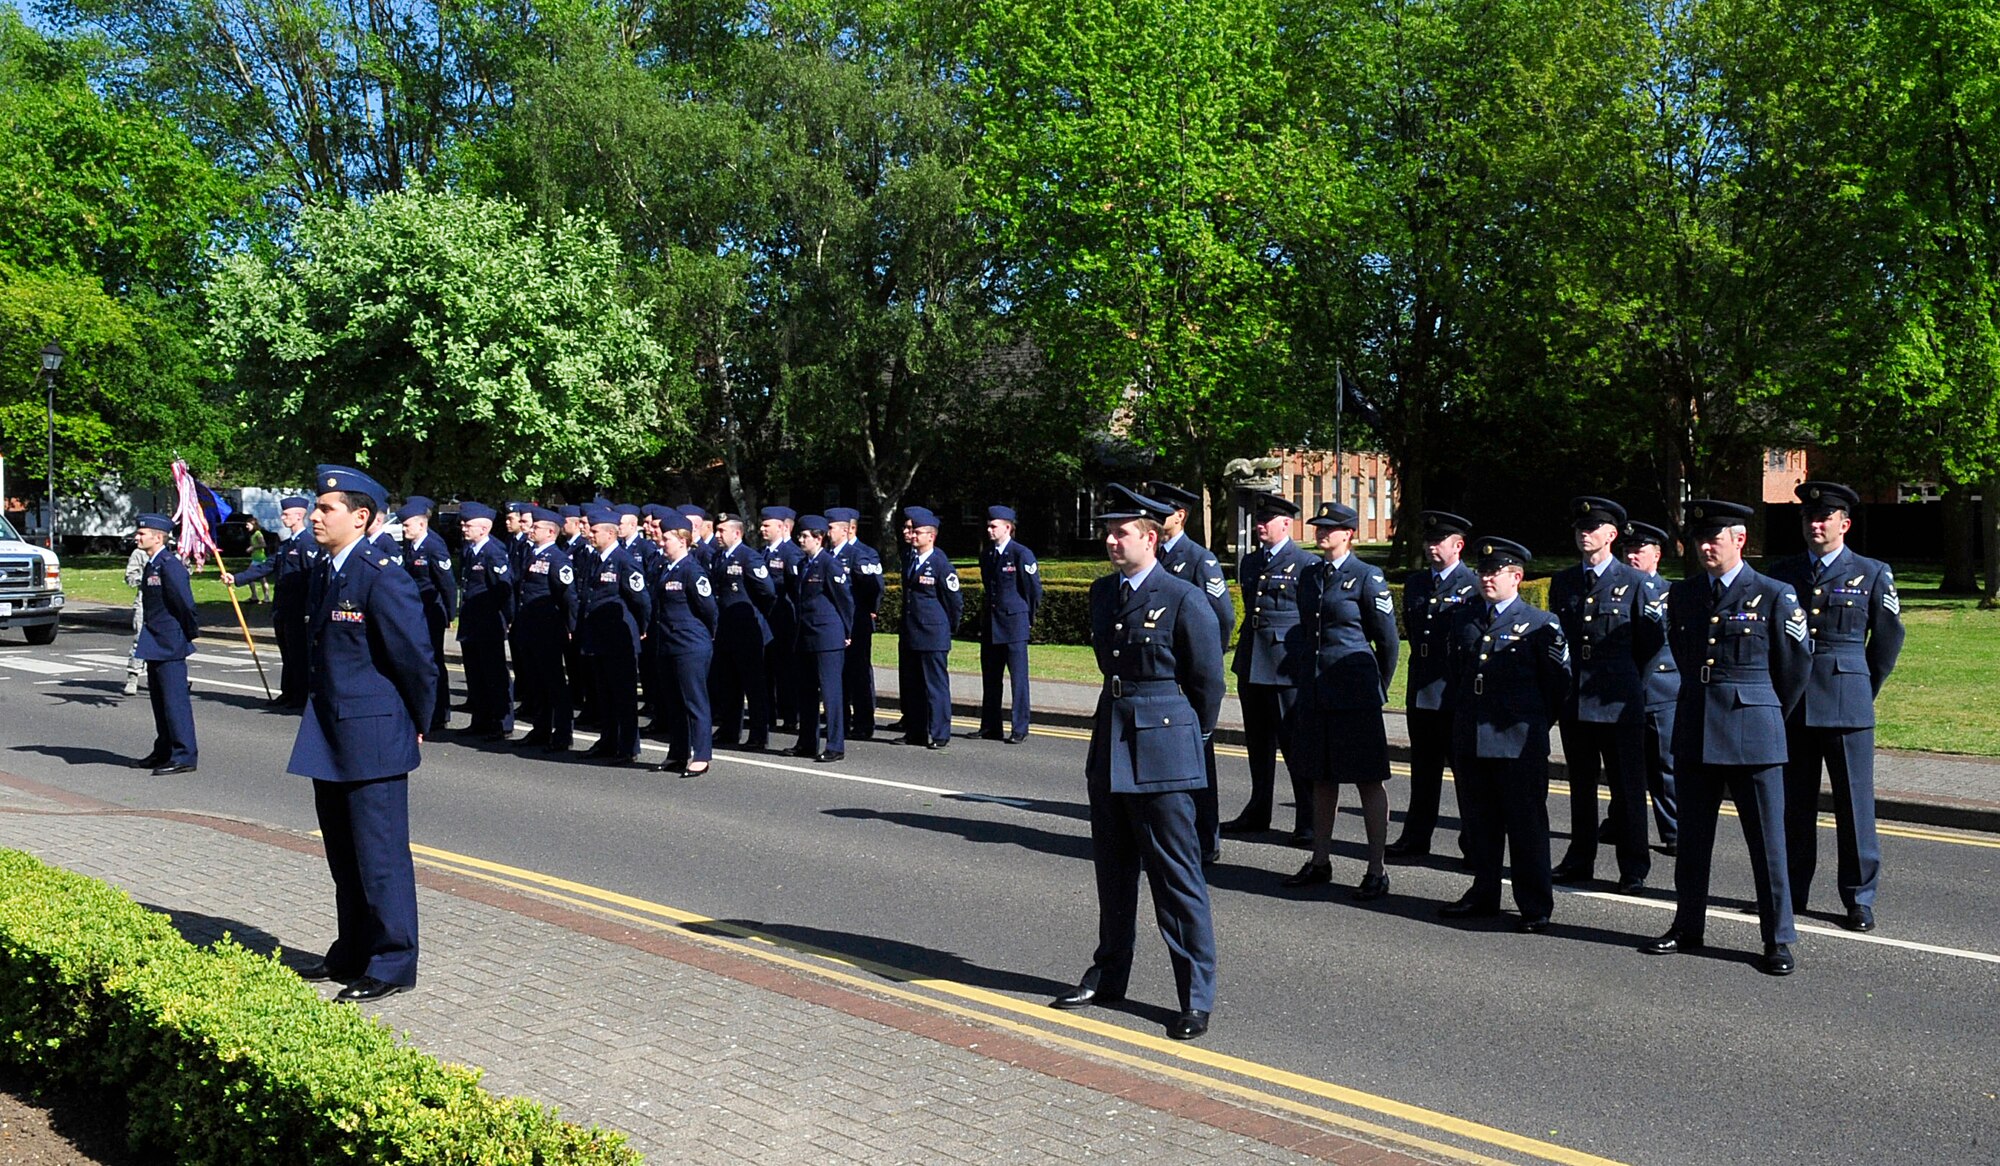 RAF MILDENHALL, England – Team Mildenhall Airmen from the 488th Intelligence Squadron and 95th Reconnaissance Squadron and British airmen from the 51 Squadron, Royal Air Force Waddington, participate in a retreat ceremony here, May 25, 2012. The 51 Sq. and the 488th IS are sister squadrons and routinely train together. (U.S. Air Force photo/Senior Airman Ethan Morgan)  
